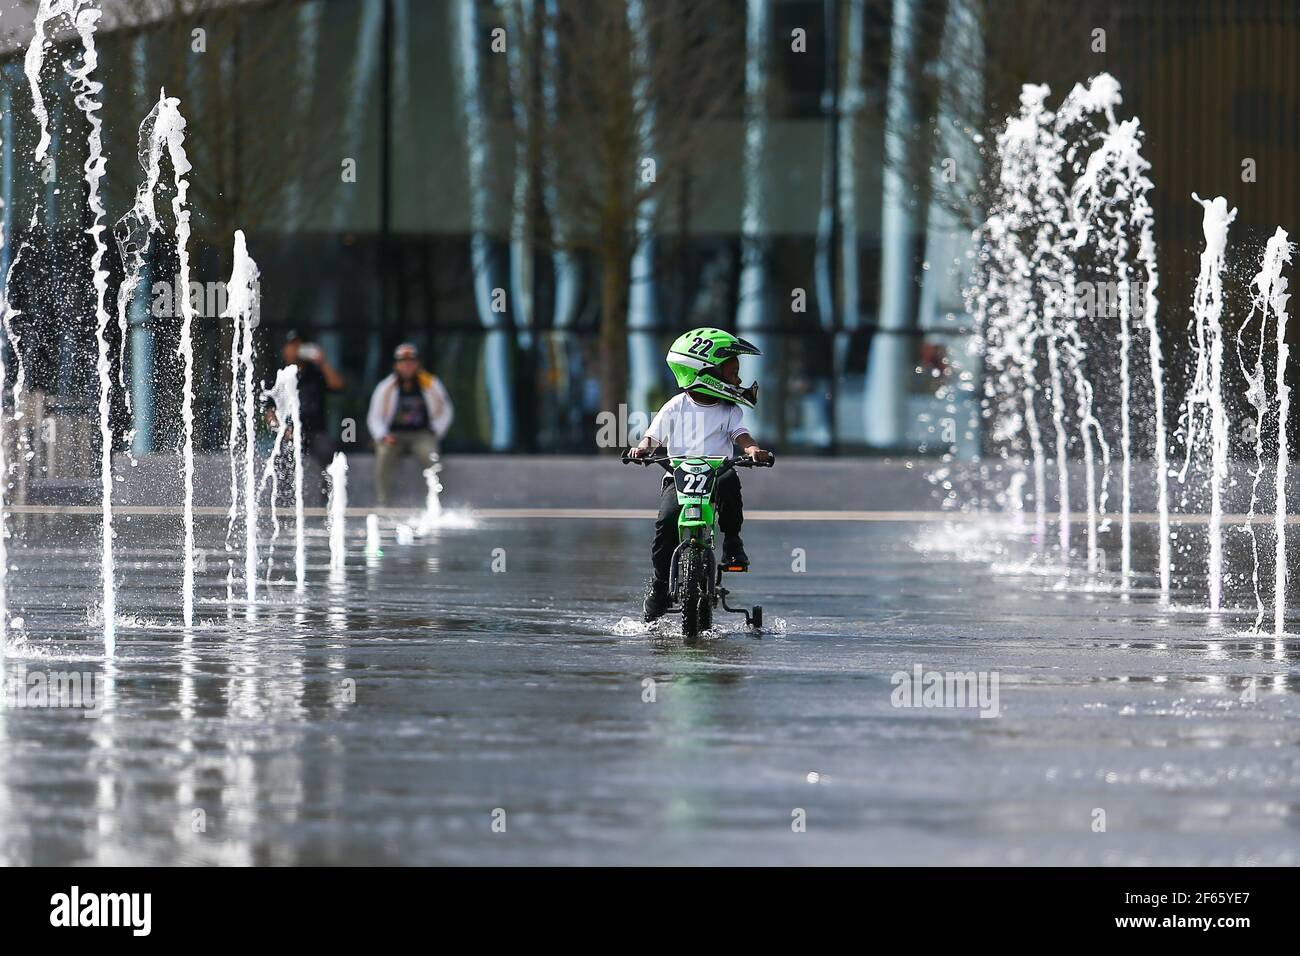 Birmingham, UK. 30th Mar, 2021. 4 year old McKay plays in the fountains in Centenary Square in Birmingham city centre. Credit: Peter Lopeman/Alamy Live News Stock Photo